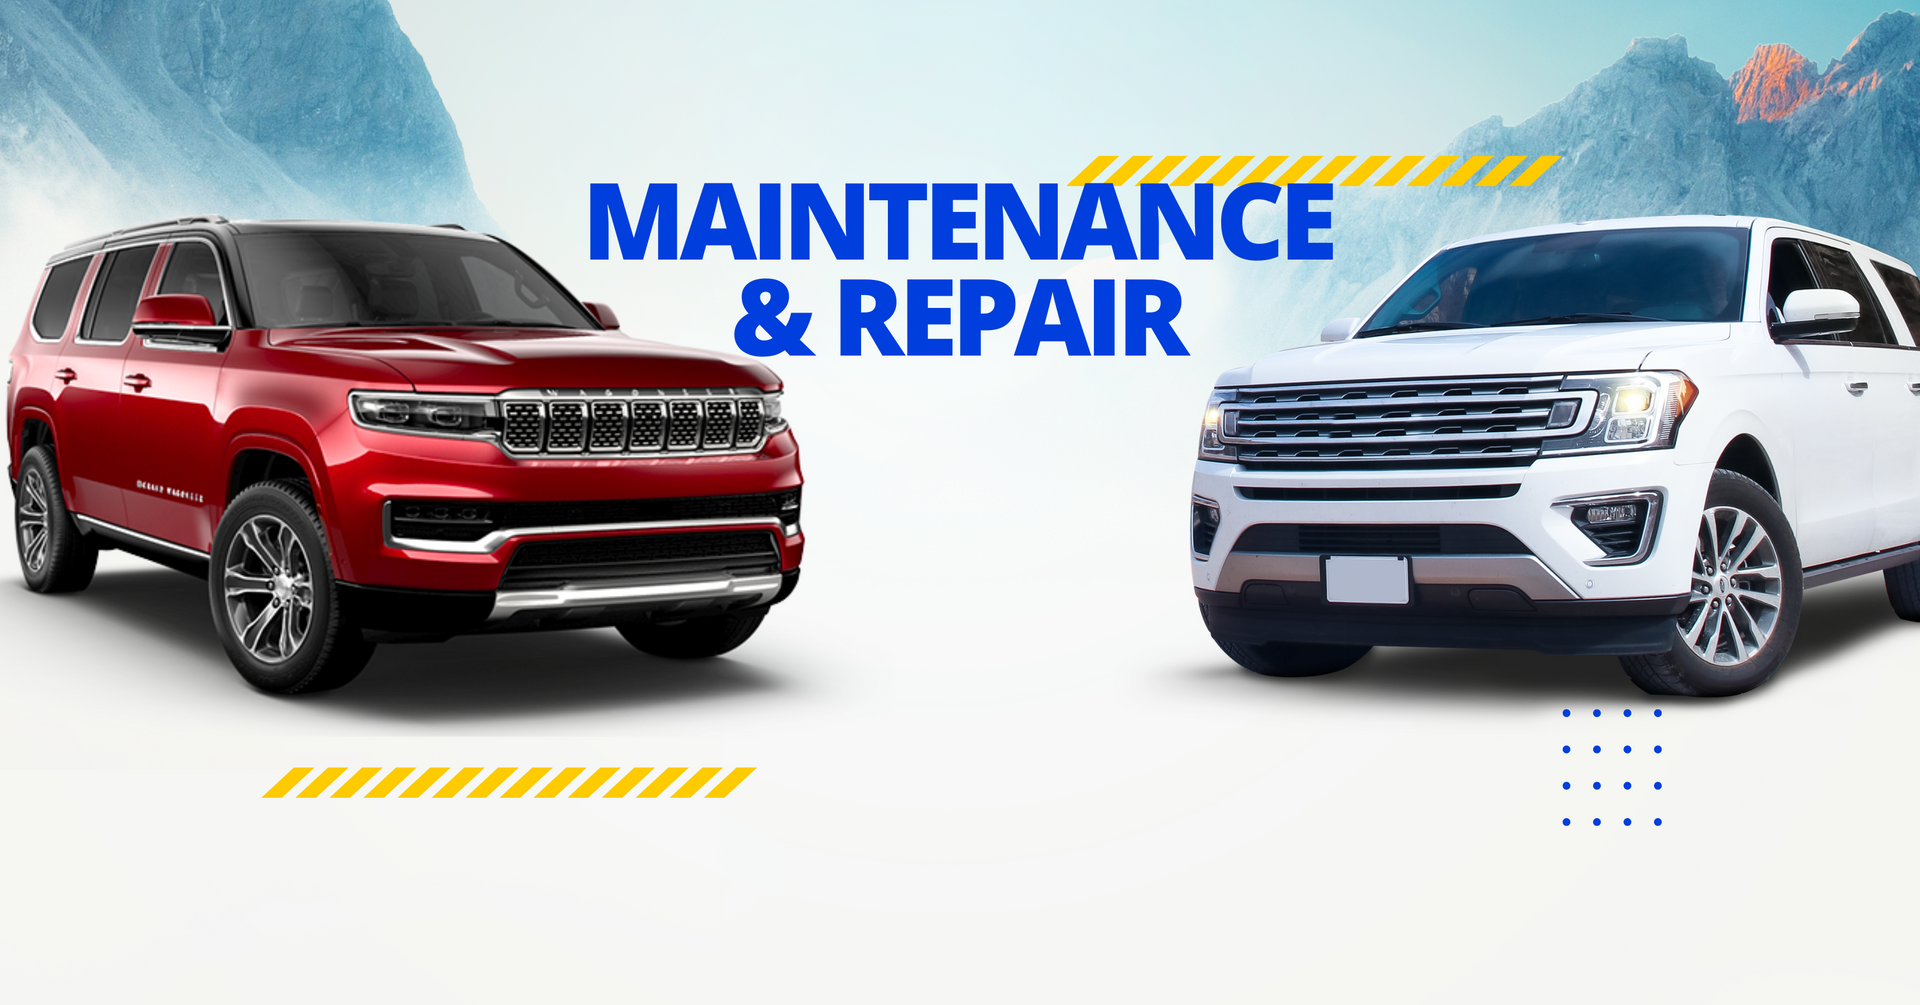 SUV repair and maintenance dealership alternative for auto repair and maintenance in Cincinnati ohio butler county fairfield oh OHio west chester township shopfix franklin